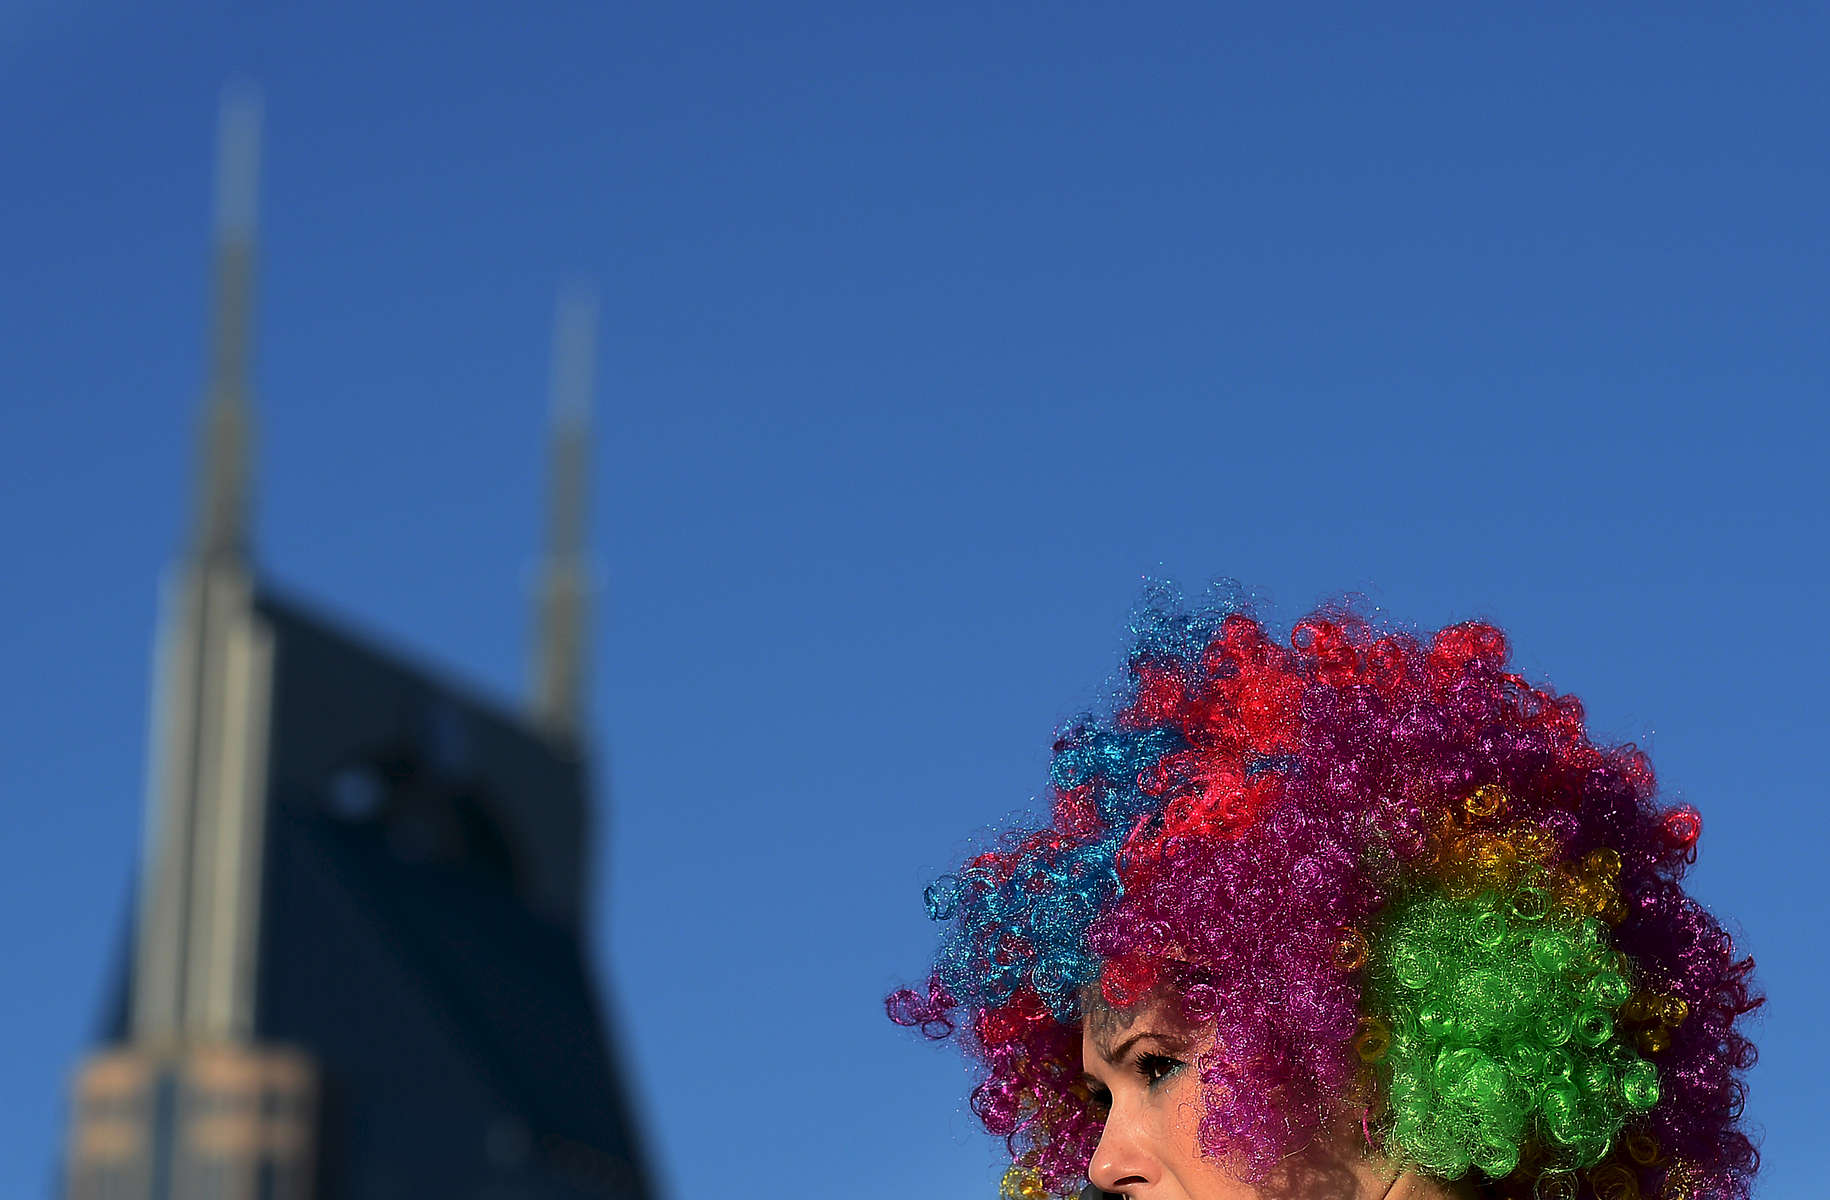 Wearing rainbow wigs and white outfits, a runner prepares to participate in the 5k Color Run near the AT&T building in Nashville, Tenn.(Mark Zaleski/ For The Tennessean)